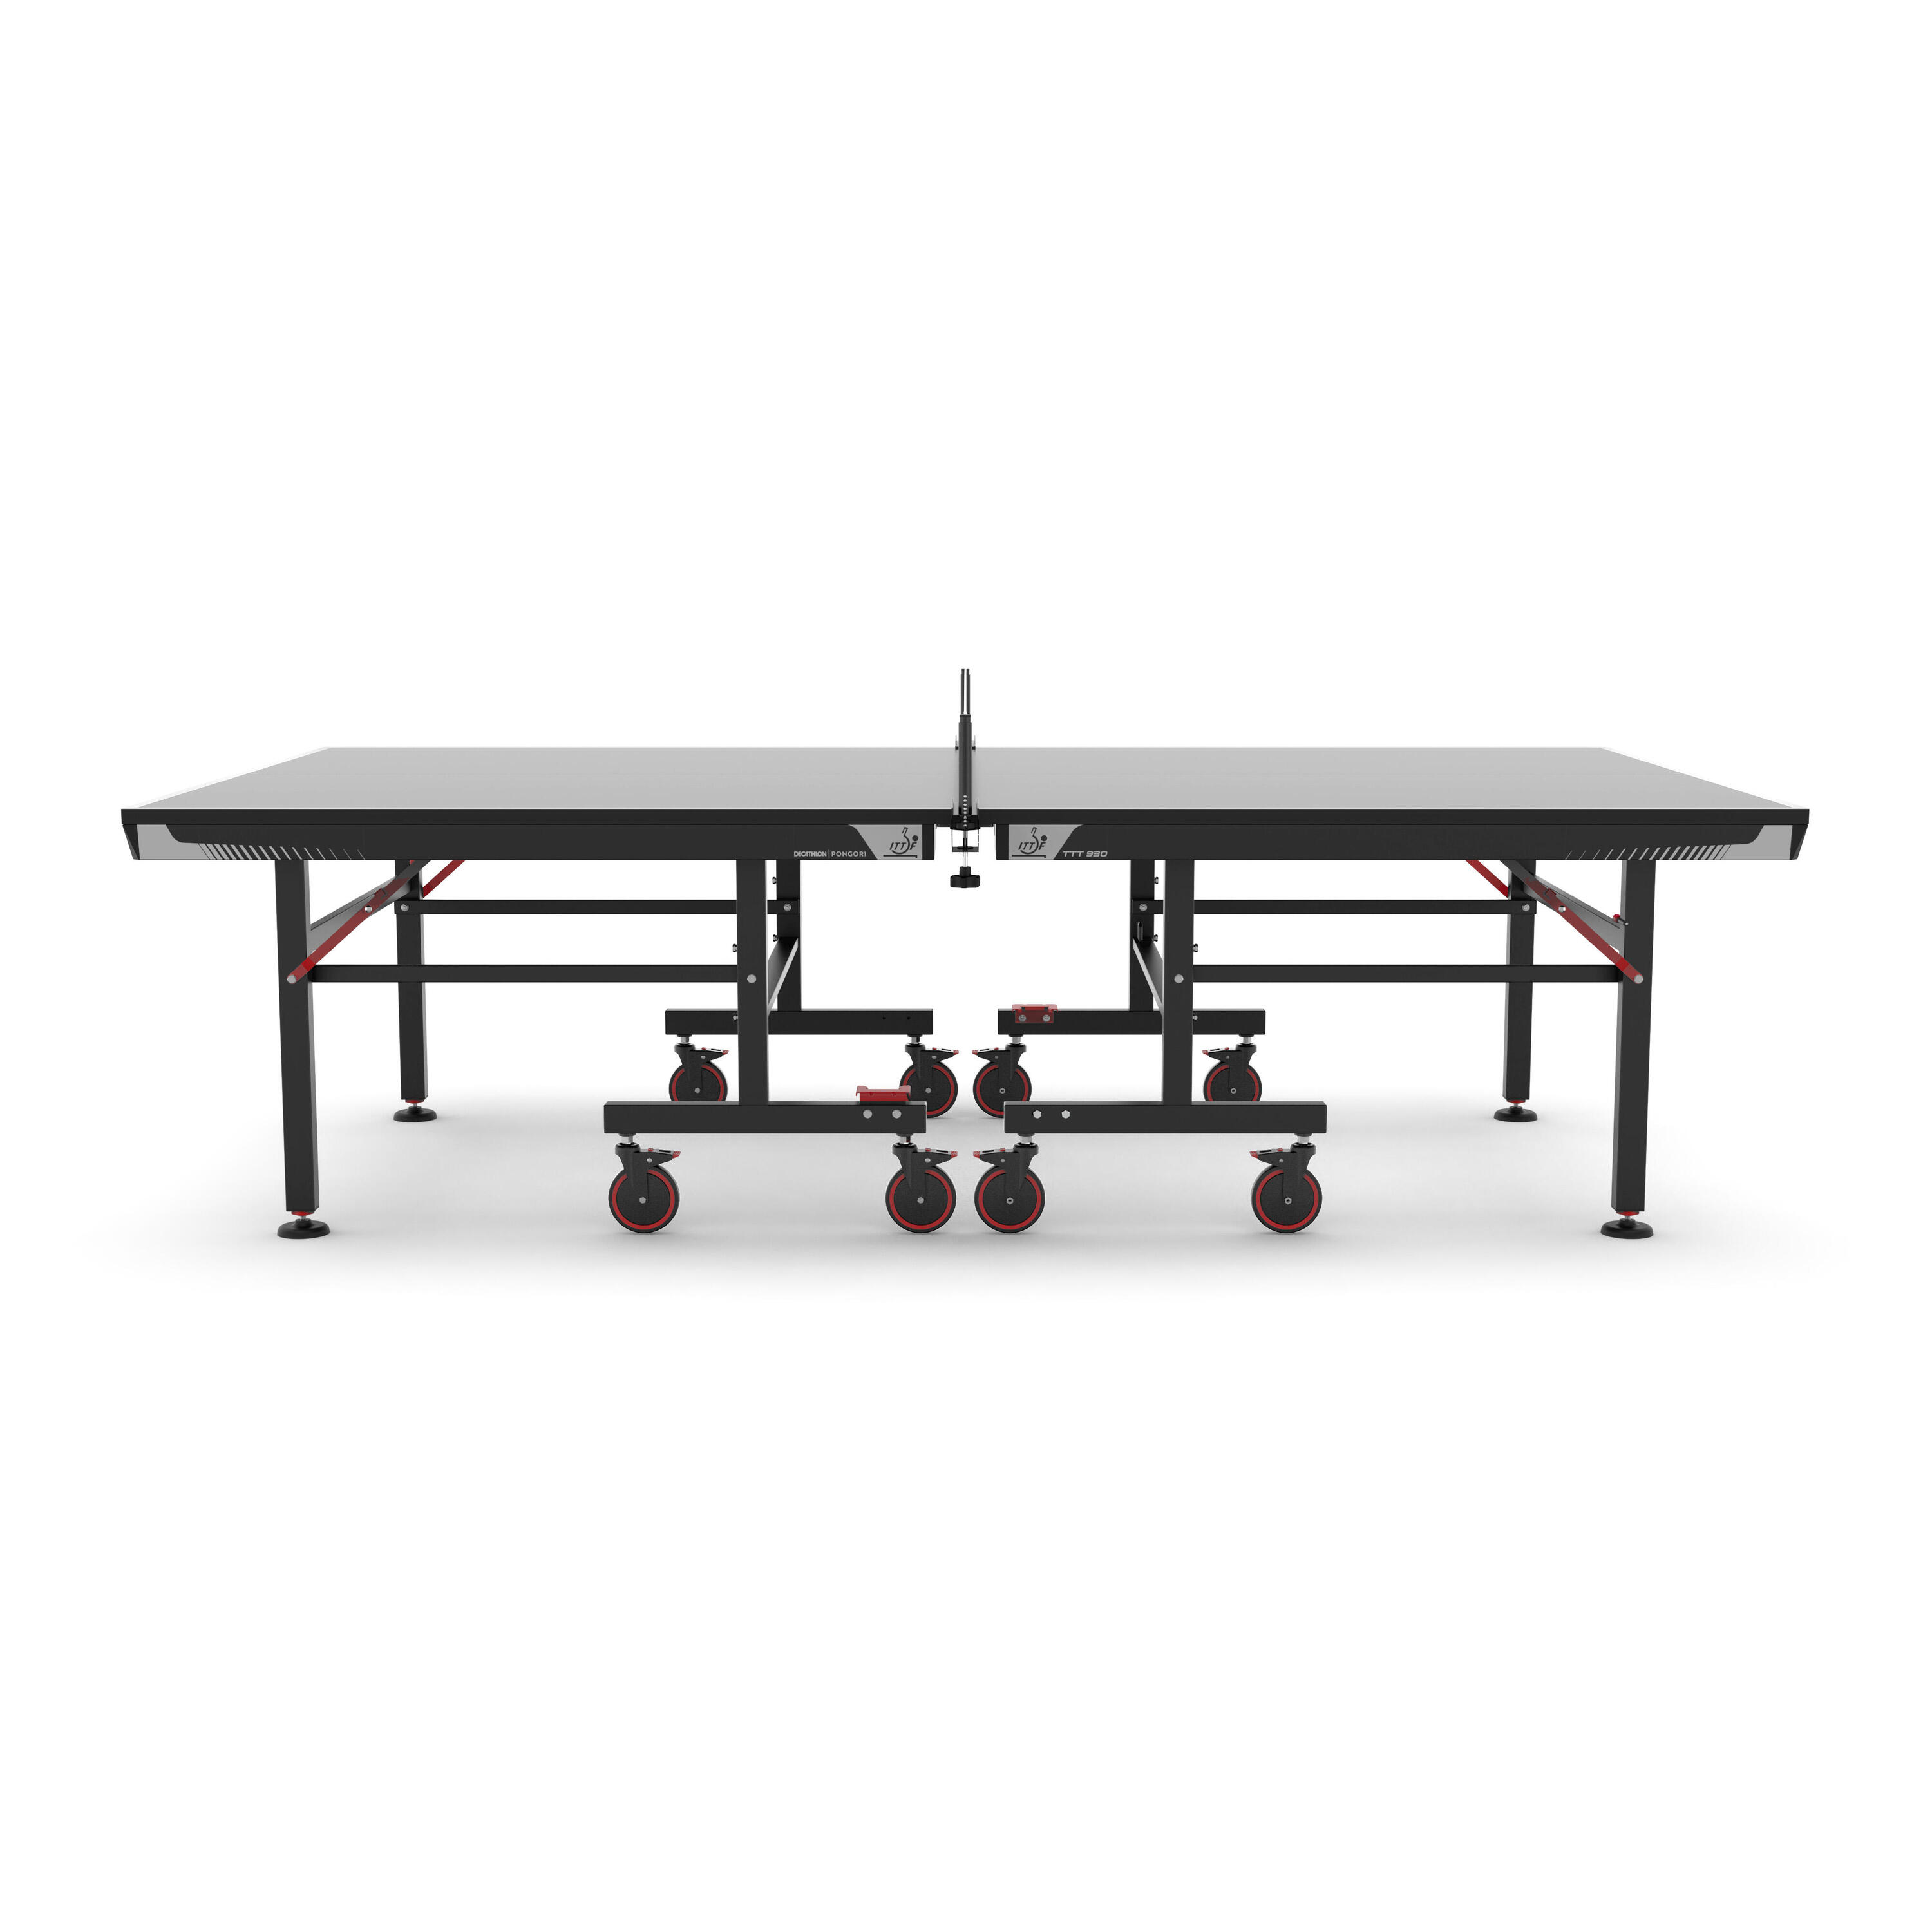 ITTF-Approved Club Table Tennis Table TTT 930 with Black Tabletops 5/15